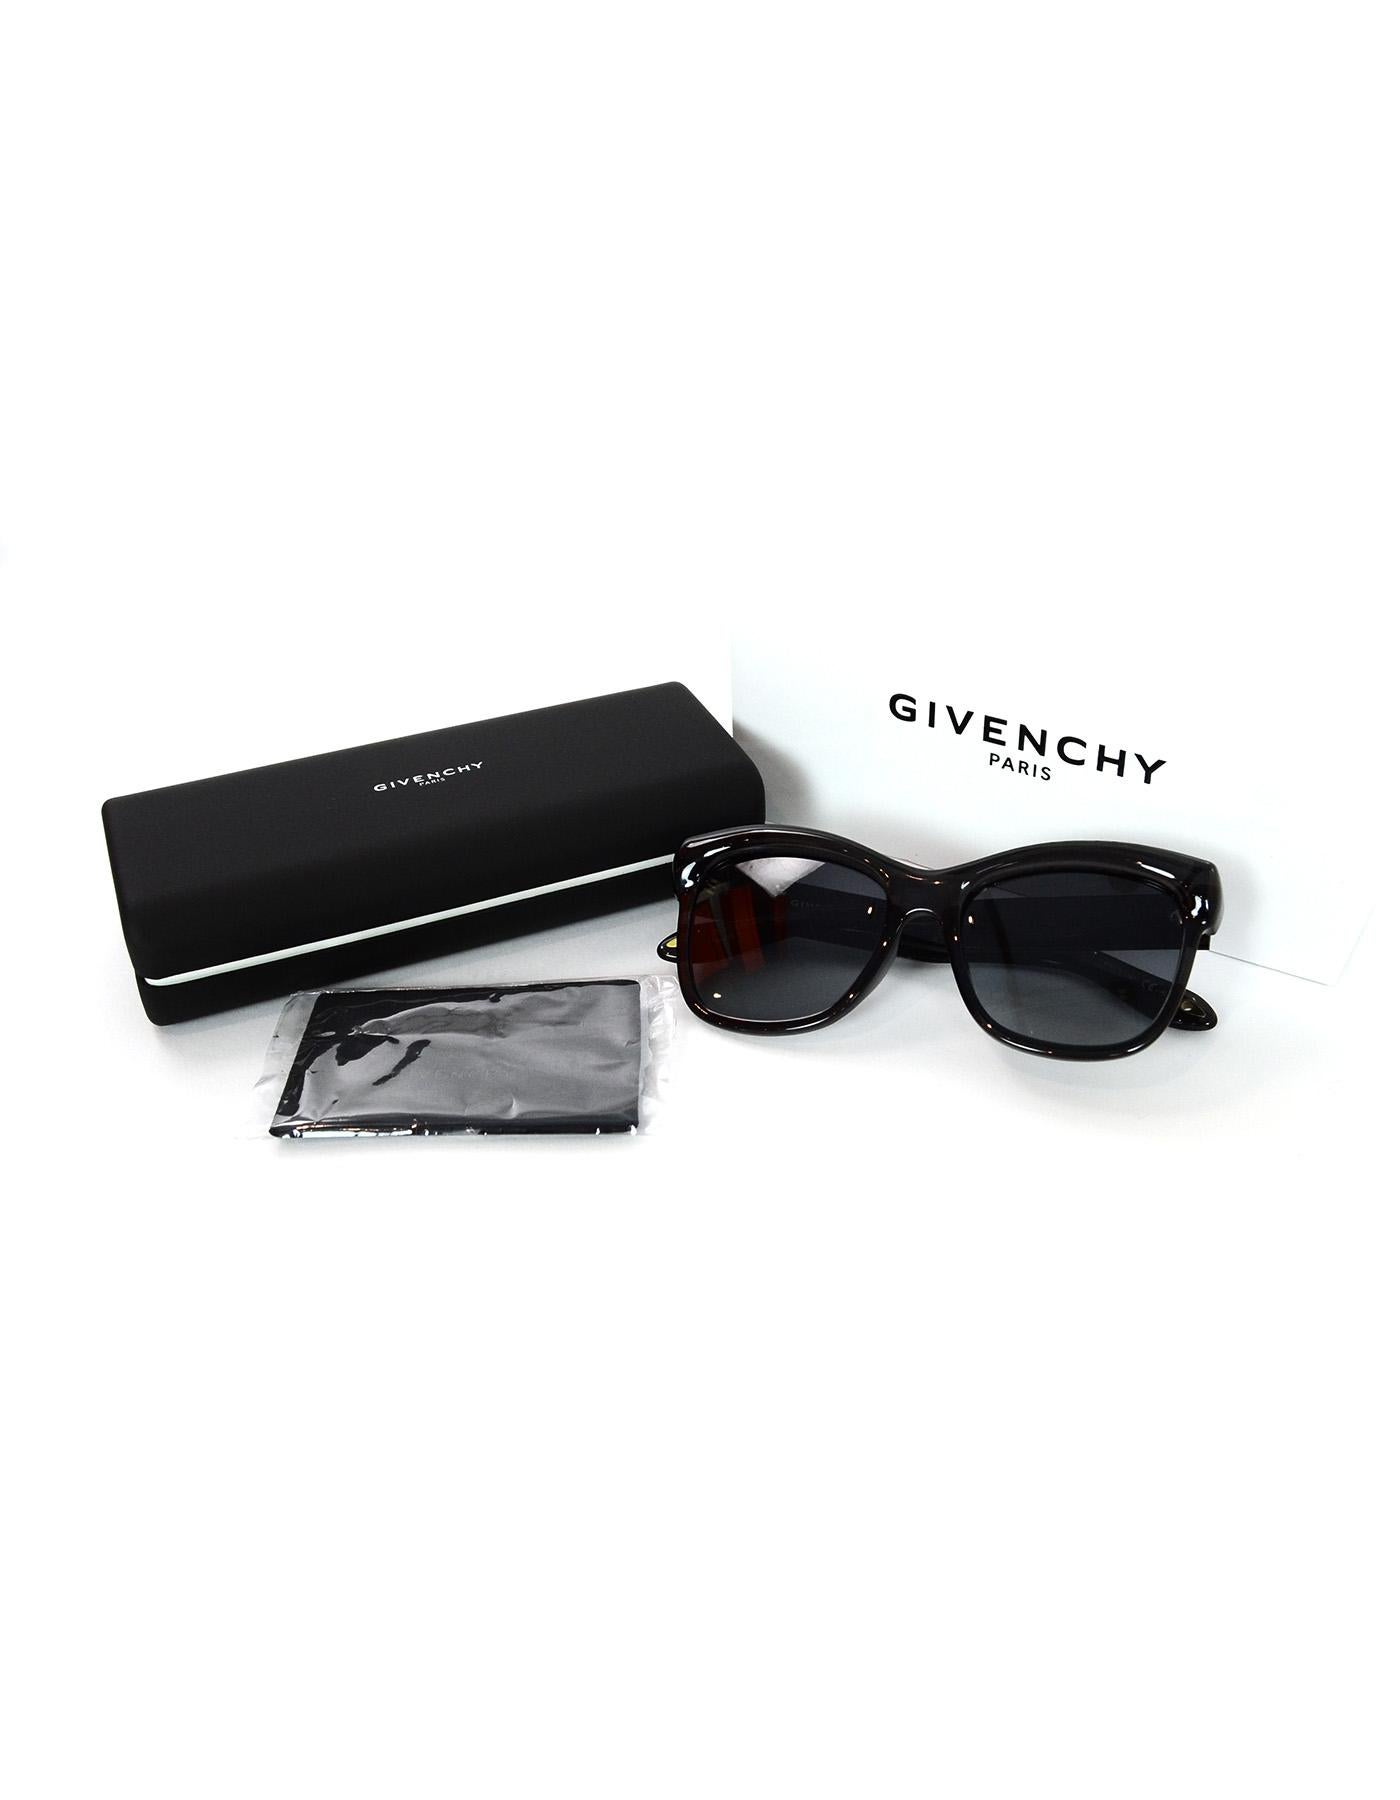 Givenchy Dark Grey Sunglasses W/ Case

Made In: Italy
Color: Dark grey
Hardware: Goldtone
Materials: Resin and metal
Overall Condition: Excellent pre-owned condition 
Estimated Retail: $325 + tax
Includes: Givenchy case, box and tags

Measurements: